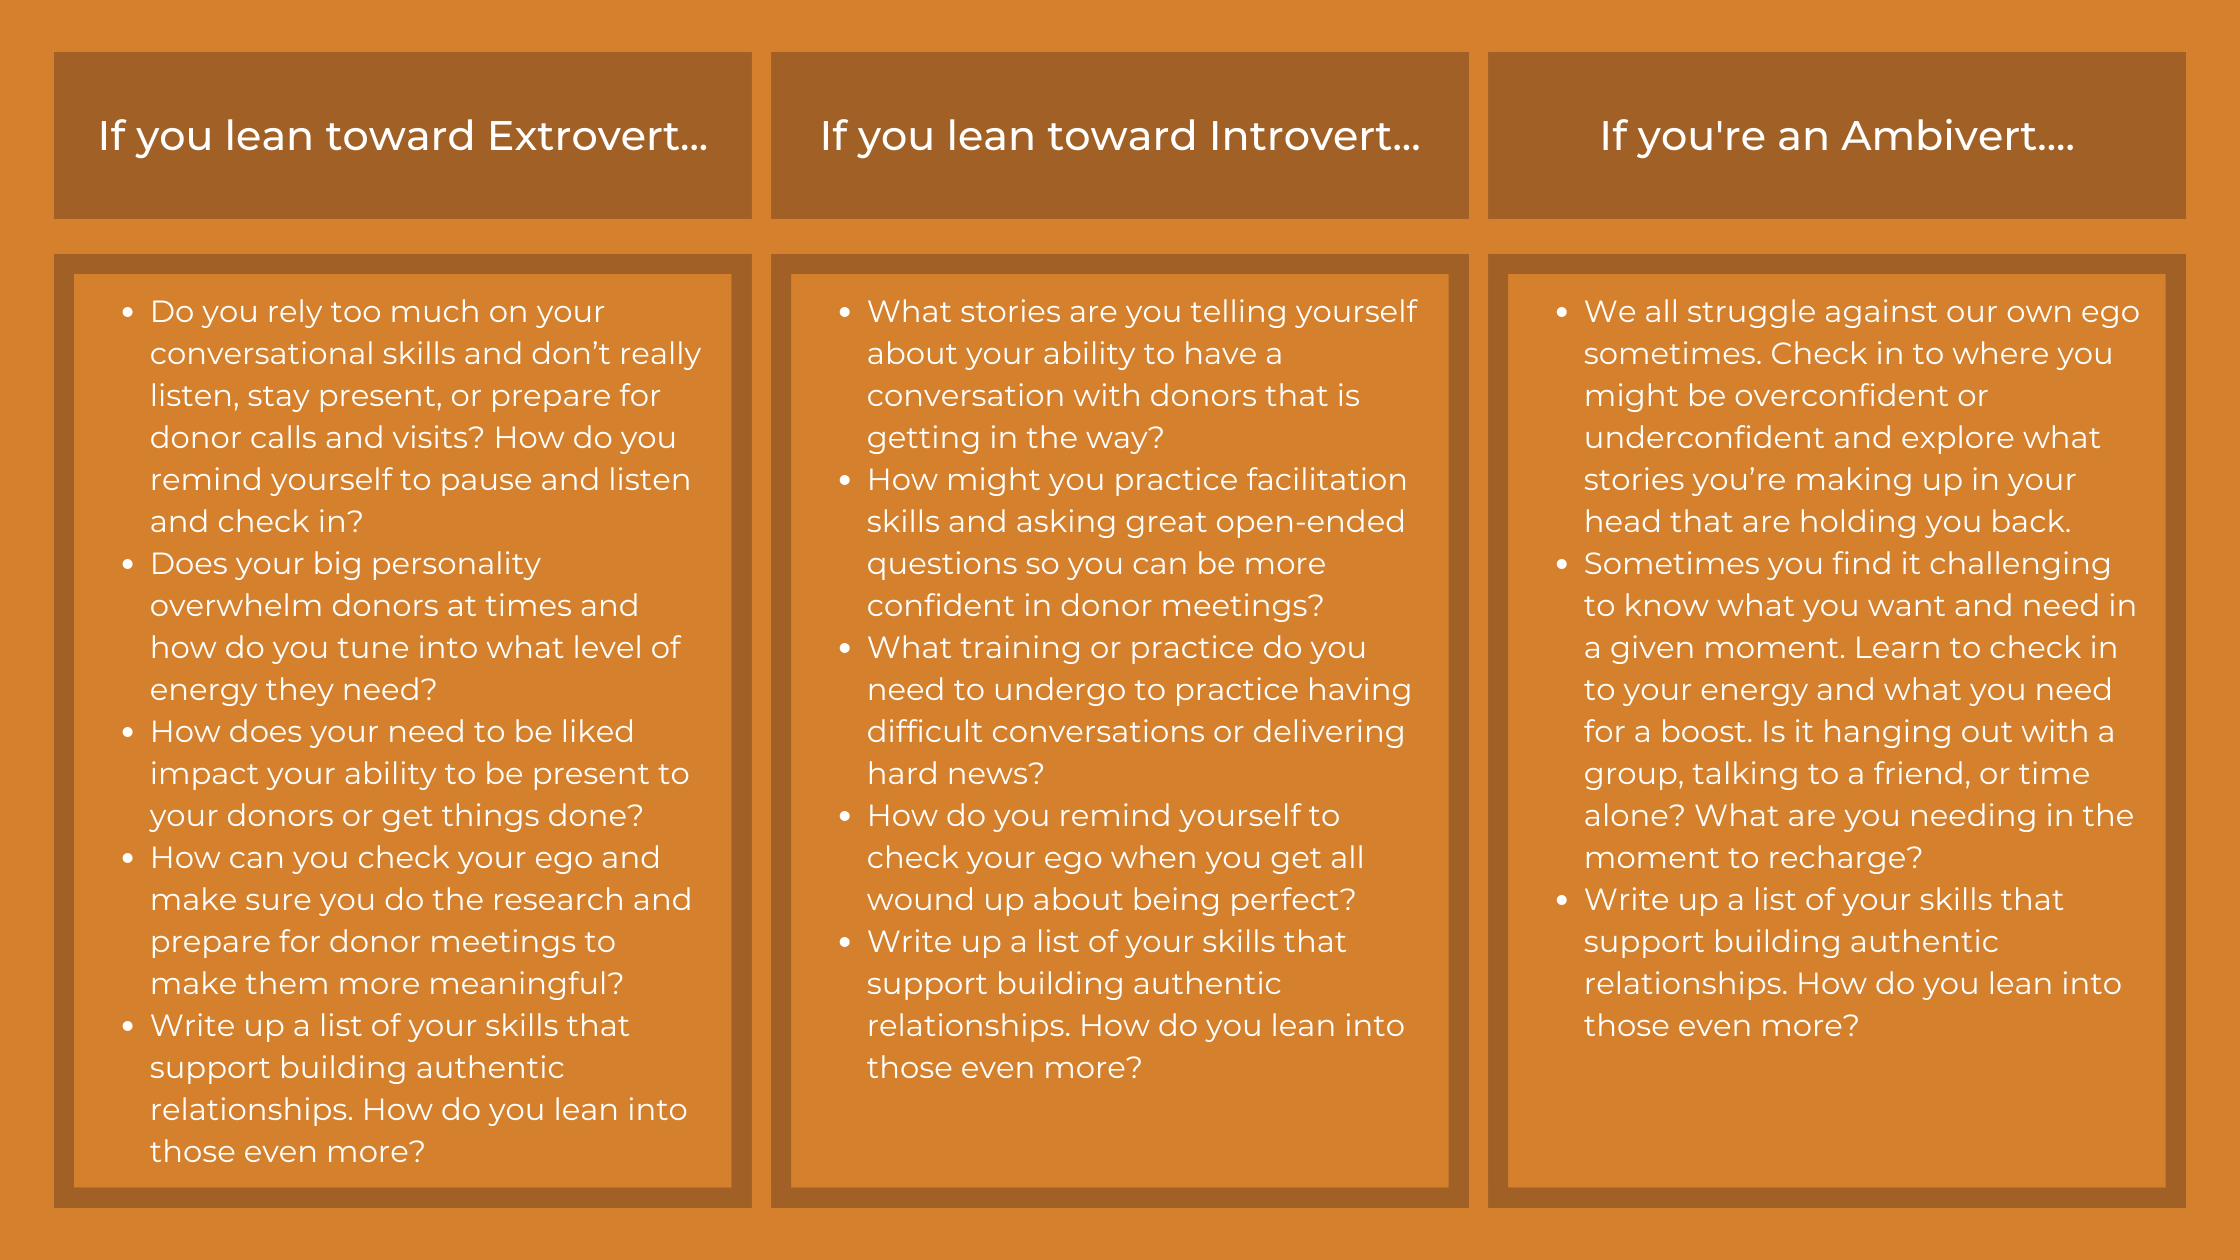 Chart: If You Lean Toward Extrovert: • Do you rely too much on your conversational skills and don’t really listen, stay present, or prepare for donor calls and visits? How do you remind yourself to pause and listen and check in? • Does your big personality overwhelm donors at times and how do you tune into what level of energy they need? • How does your need to be liked impact your ability to be present to your donors or get things done? • How can you check your ego and make sure you do the research and prepare for donor meetings to make them more meaningful? • Write up a list of your skills that support building authentic relationships. How do you lean into those even more? If You Lean Toward Introvert: • What stories are you telling yourself about your ability to have a conversation with donors that is getting in the way? • How might you practice facilitation skills and asking great open-ended questions so you can be more confident in donor meetings? • What training or practice do you need to undergo to practice having difficult conversations or delivering hard news? • How do you remind yourself to check your ego when you get all wound up about being perfect? • Write up a list of your skills that support building authentic relationships. How do you lean into those even more? And even thought ambiverts have the advantage of being able to bring in the gifts of both introverts and extroverts, here are some questions to help you process as well : • We all struggle against our own ego sometimes. Check in to where you might be overconfident or underconfident and explore what stories you’re making up in your head that are holding you back. • Sometimes you find it challenging to know what you want and need in a given moment. Learn to check in to your energy and what you need for a boost. Is it hanging out with a group, talking to a friend, or time alone? What are you needing in the moment to recharge? • Write up a list of your skills that support building authentic relationships. How do you lean into those even more? 